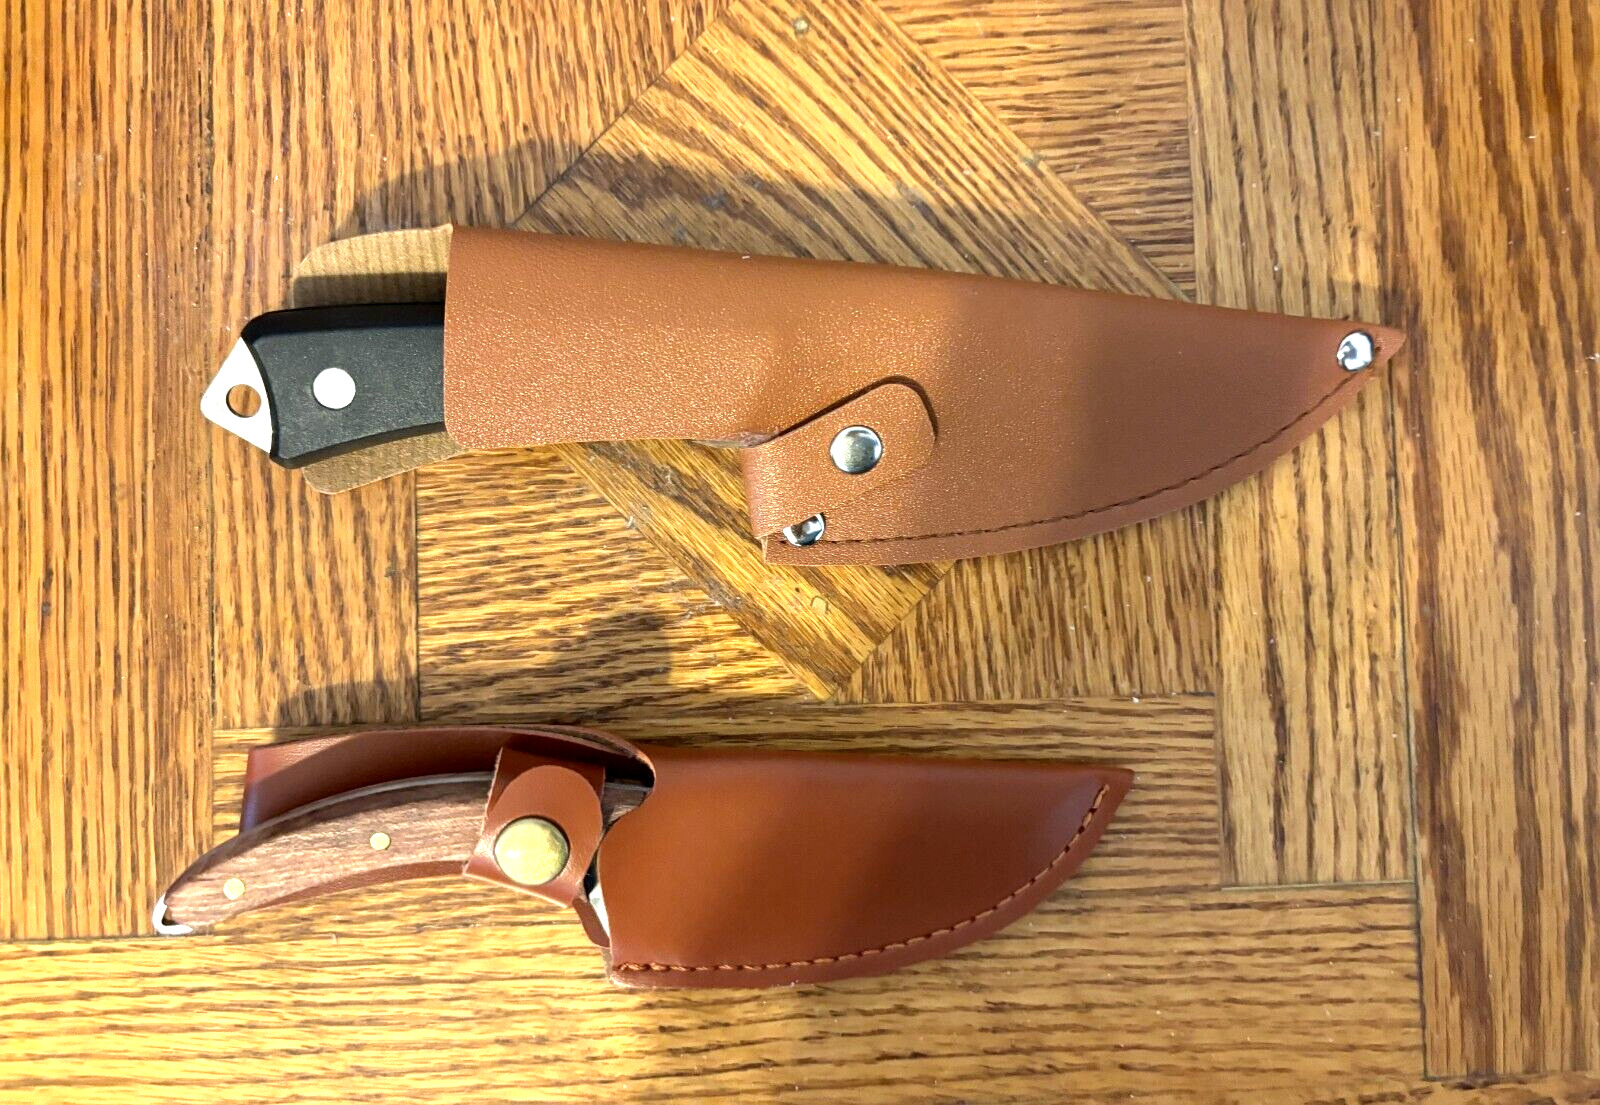 TWO NICE SMALL - STAINLESS STEEL KNIFES-FINISHED WOOD & BAKELITE HANDLES  #K4